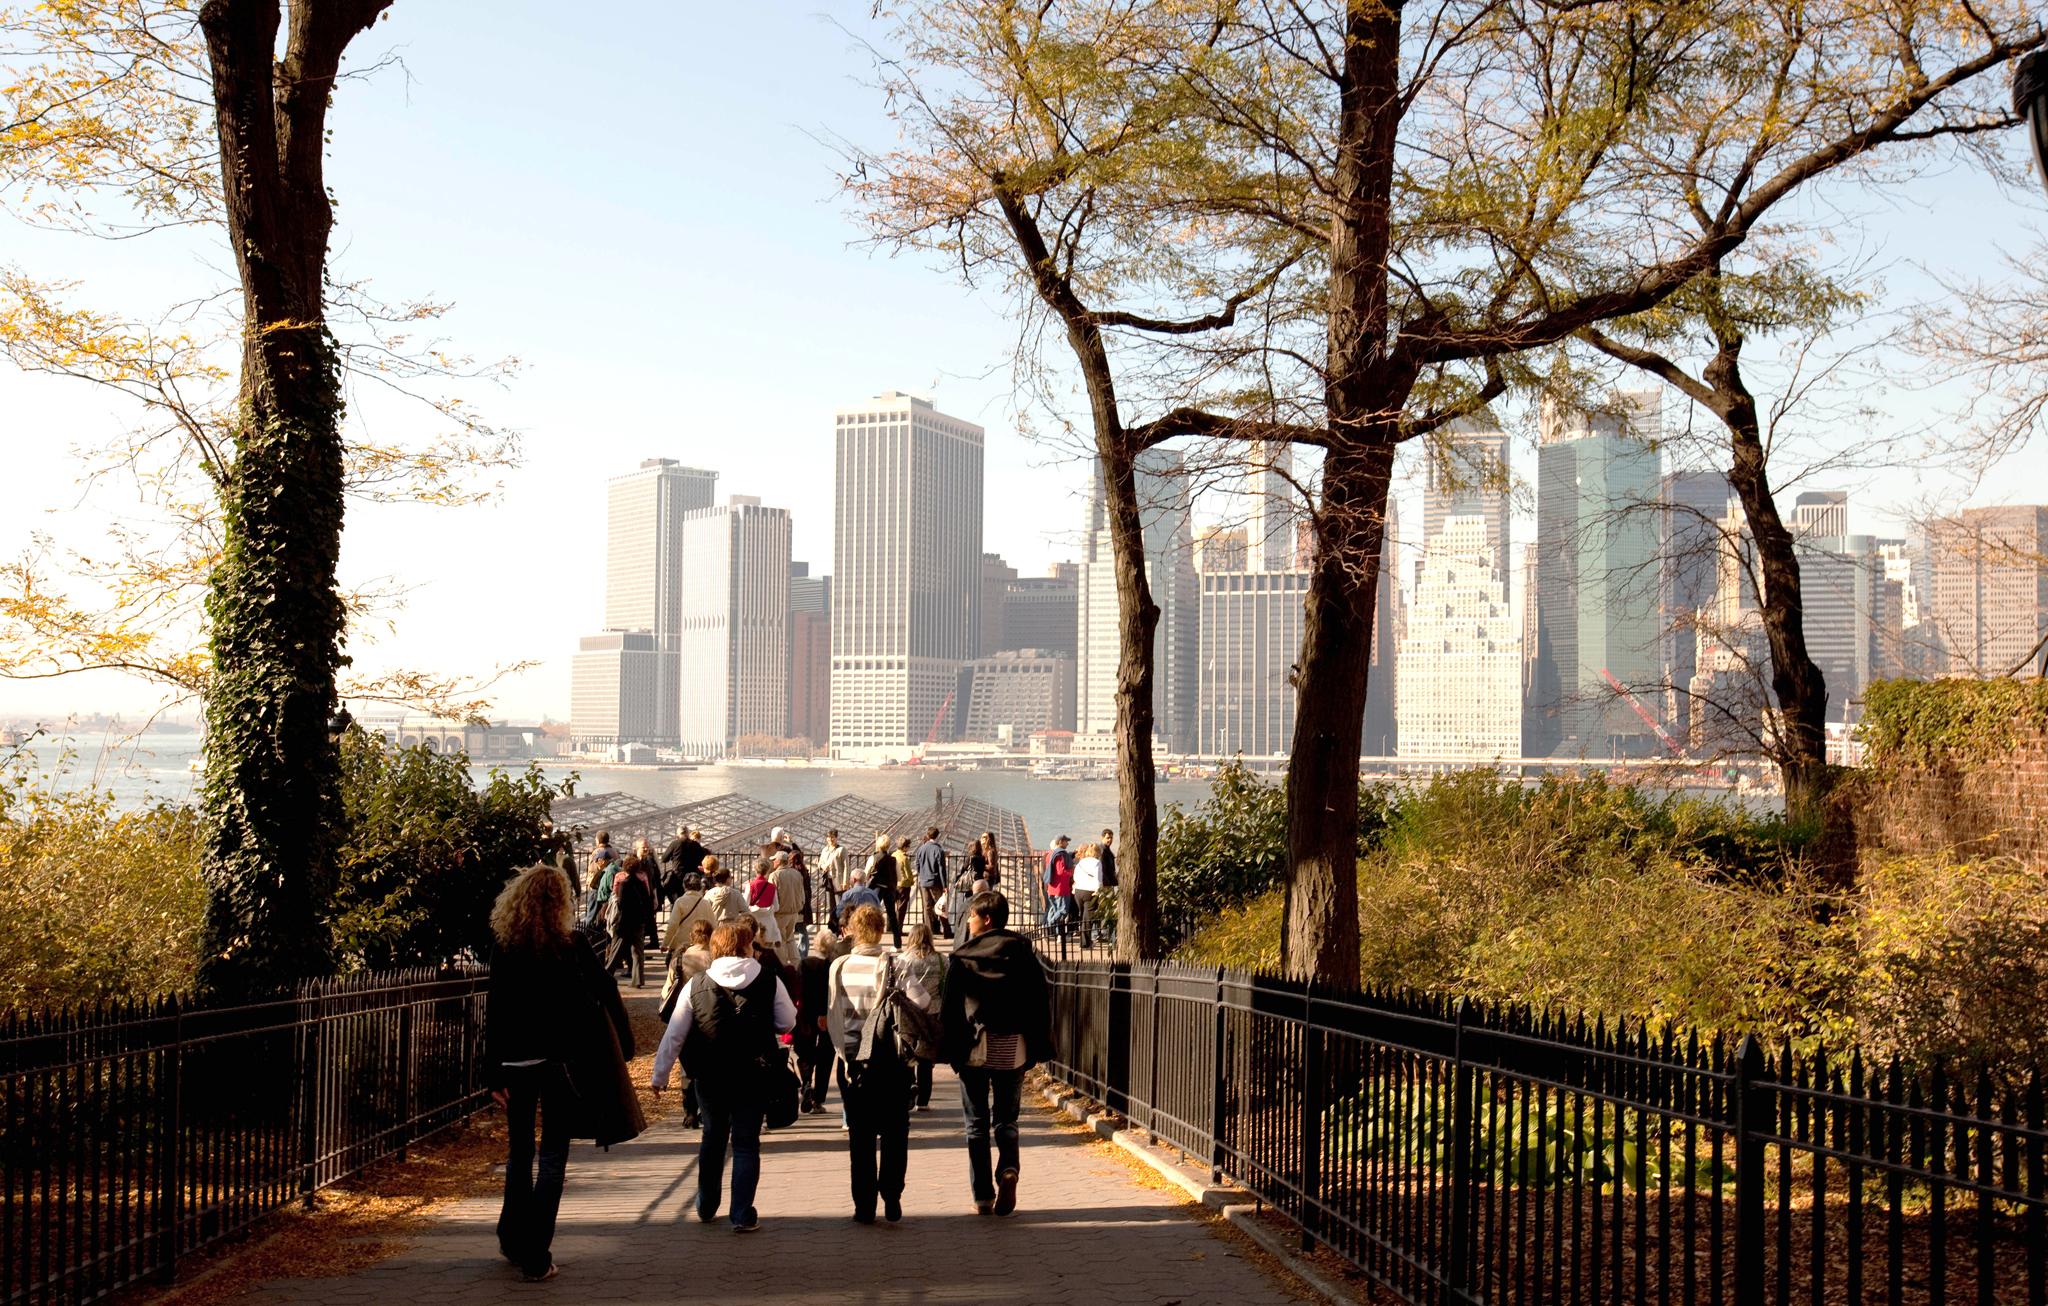 Walking in a city like New York will help you get the lie of the land - and save a few dollars